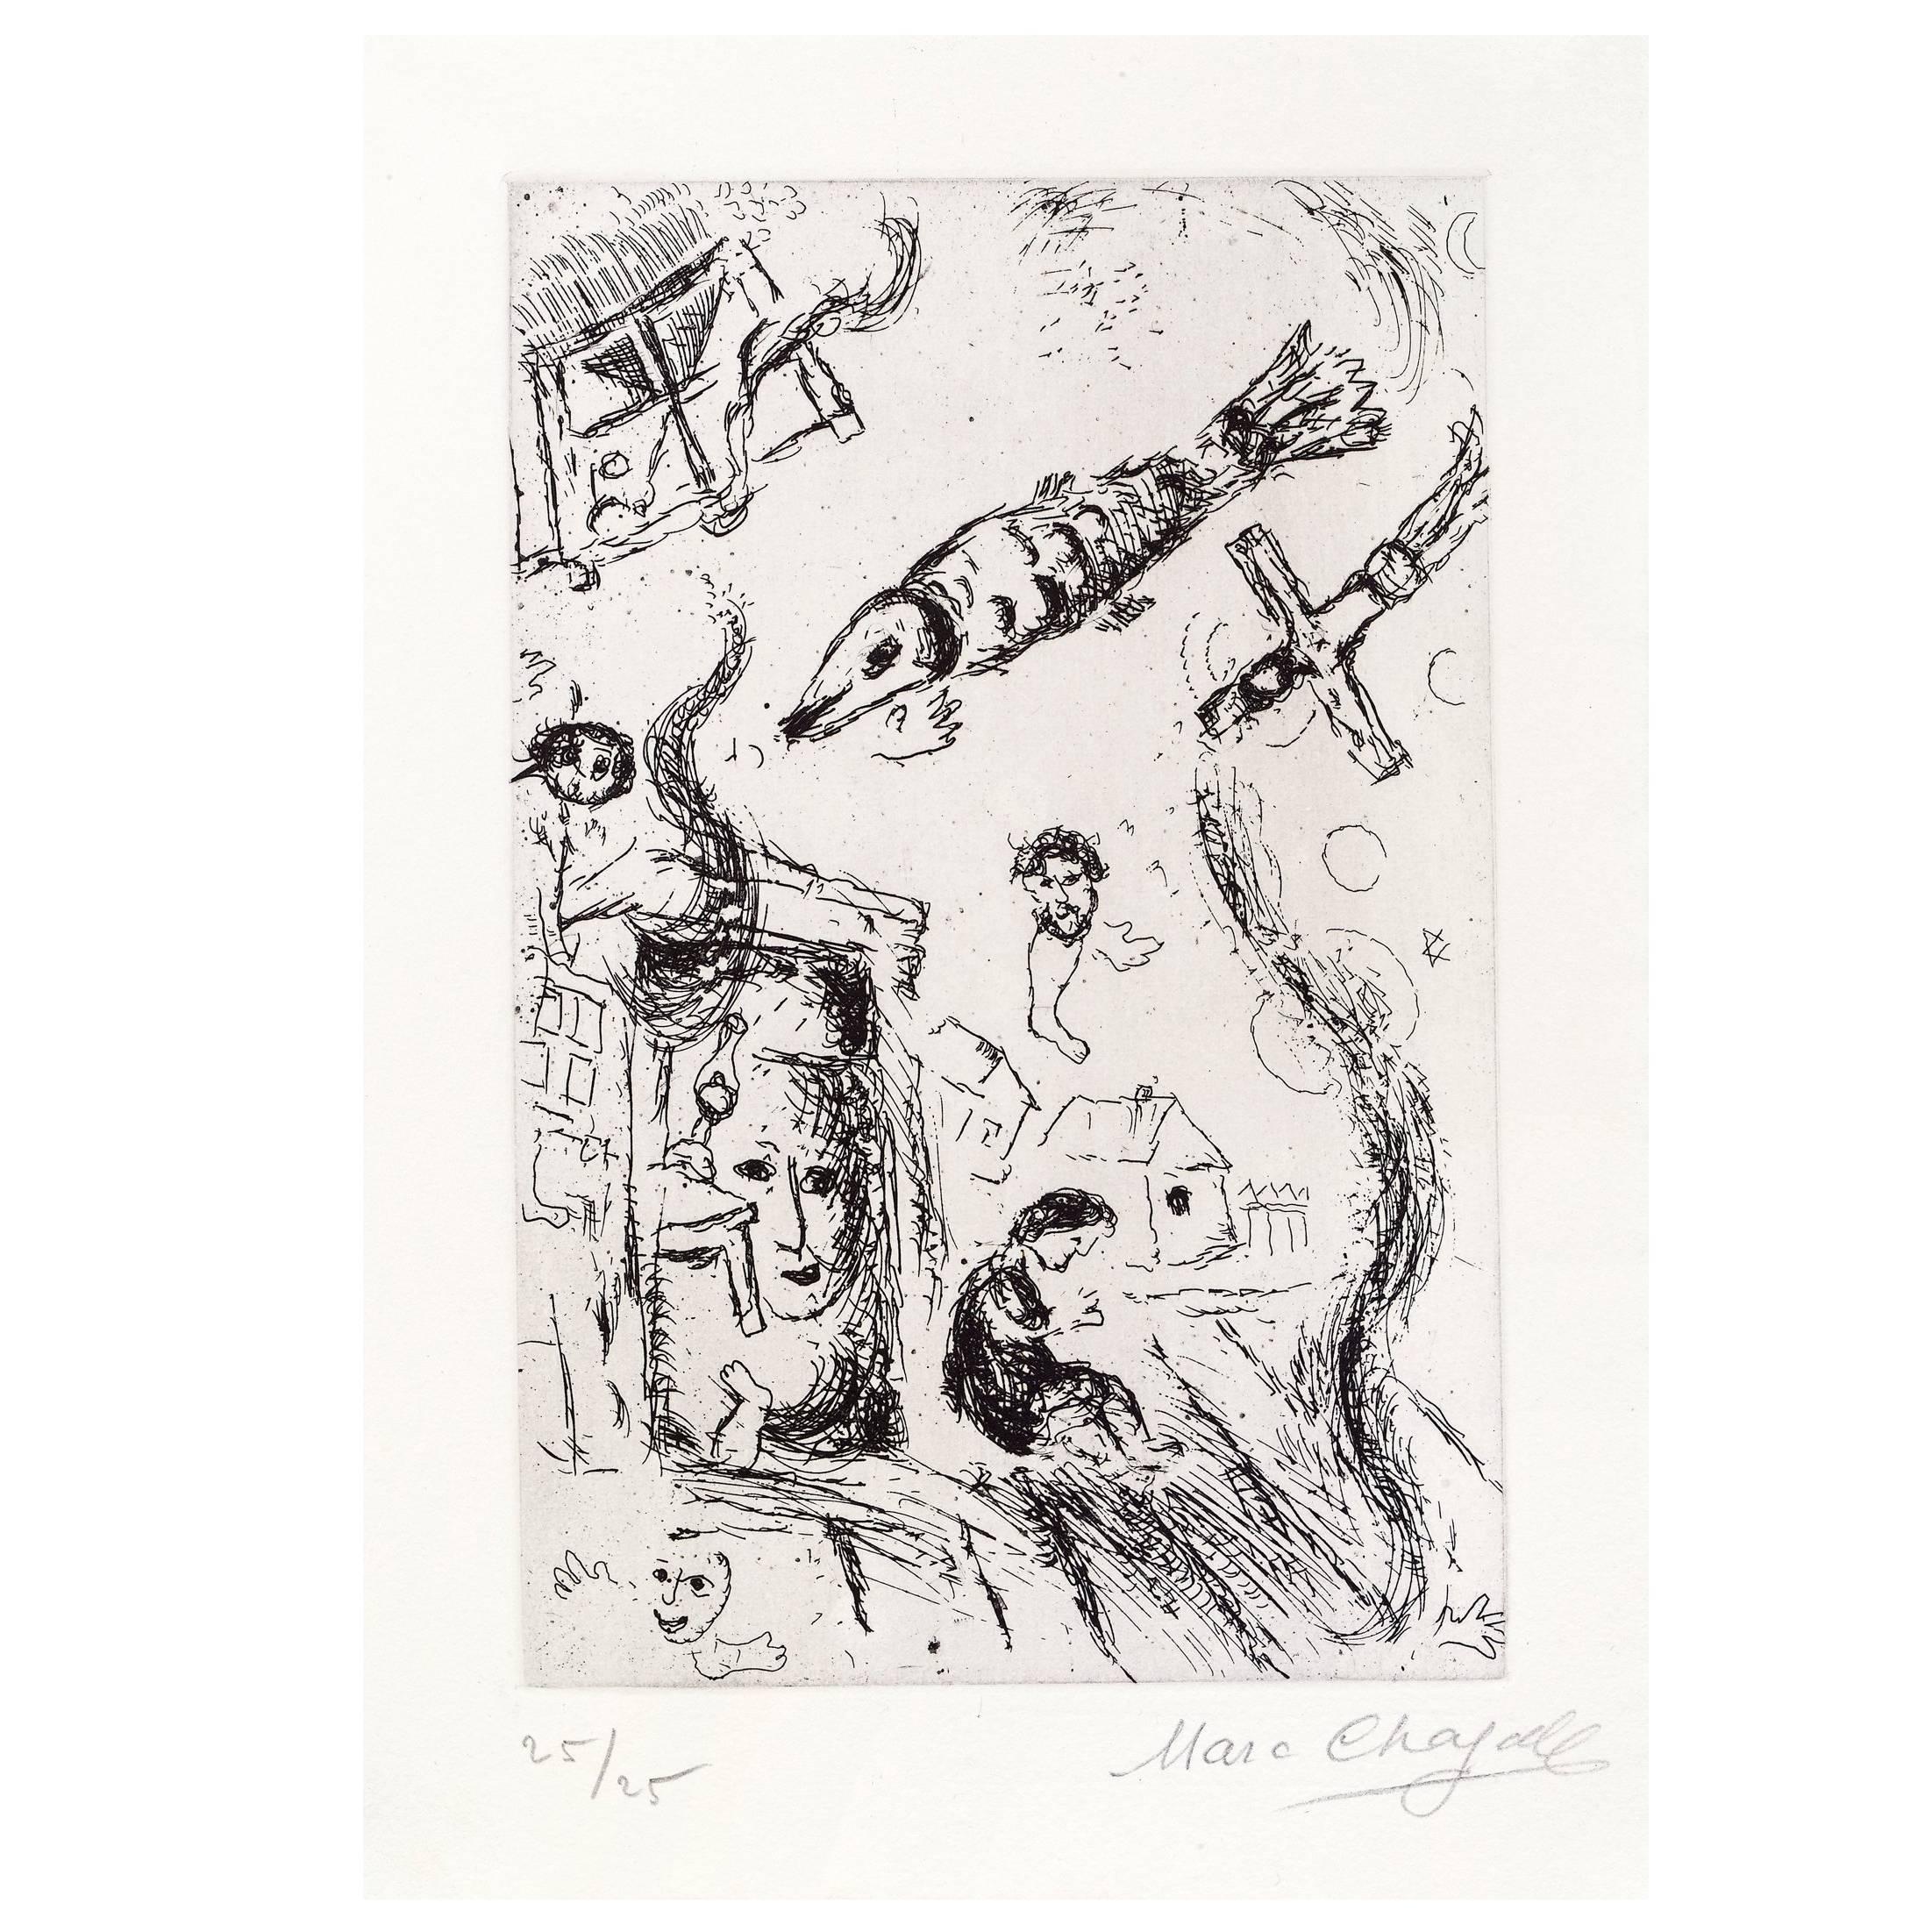 Lettre à Marc Chagall for Gallery Maeght, Paris 1969 For Sale